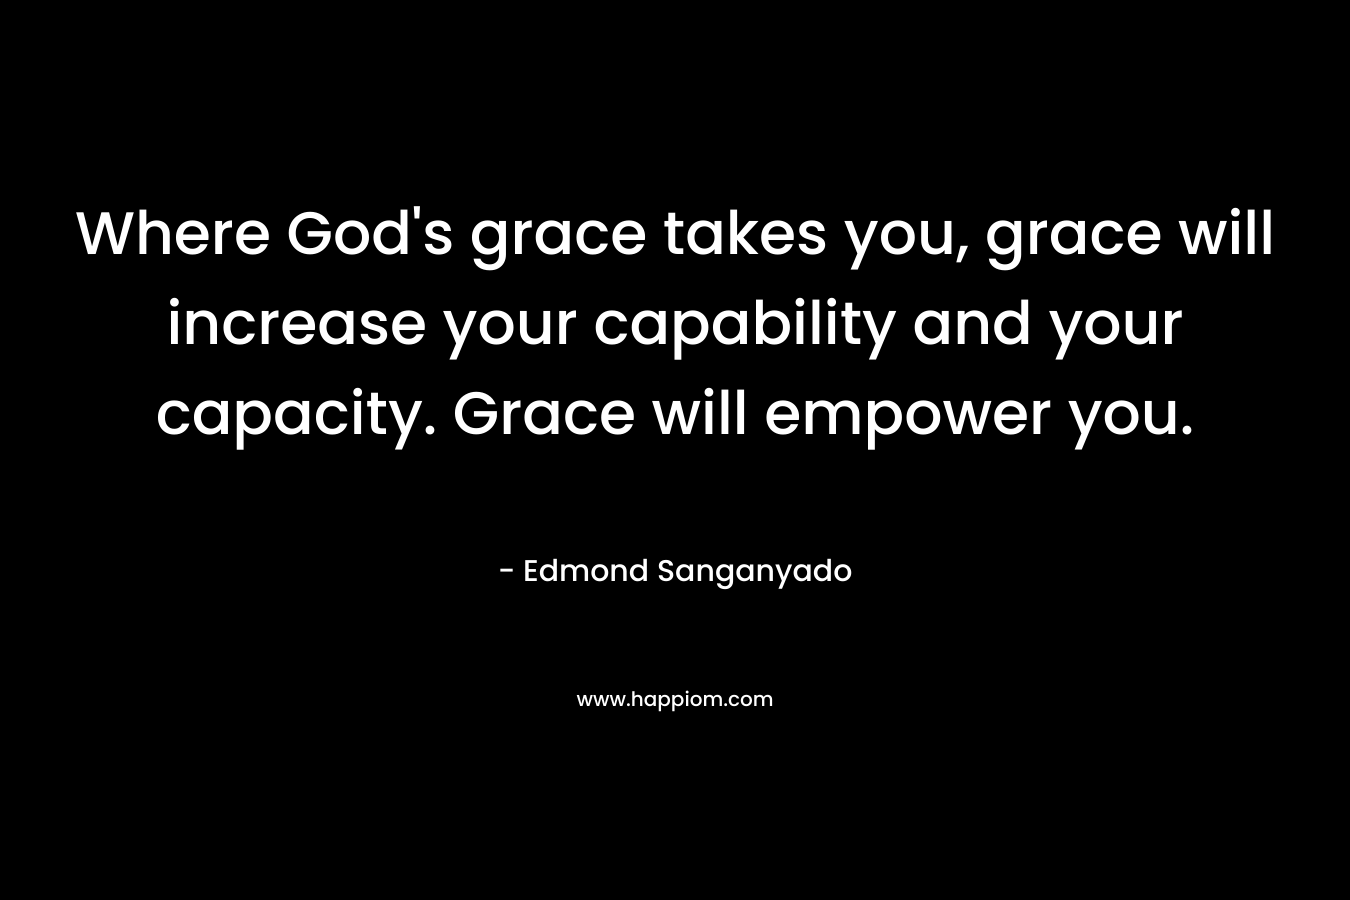 Where God's grace takes you, grace will increase your capability and your capacity. Grace will empower you.